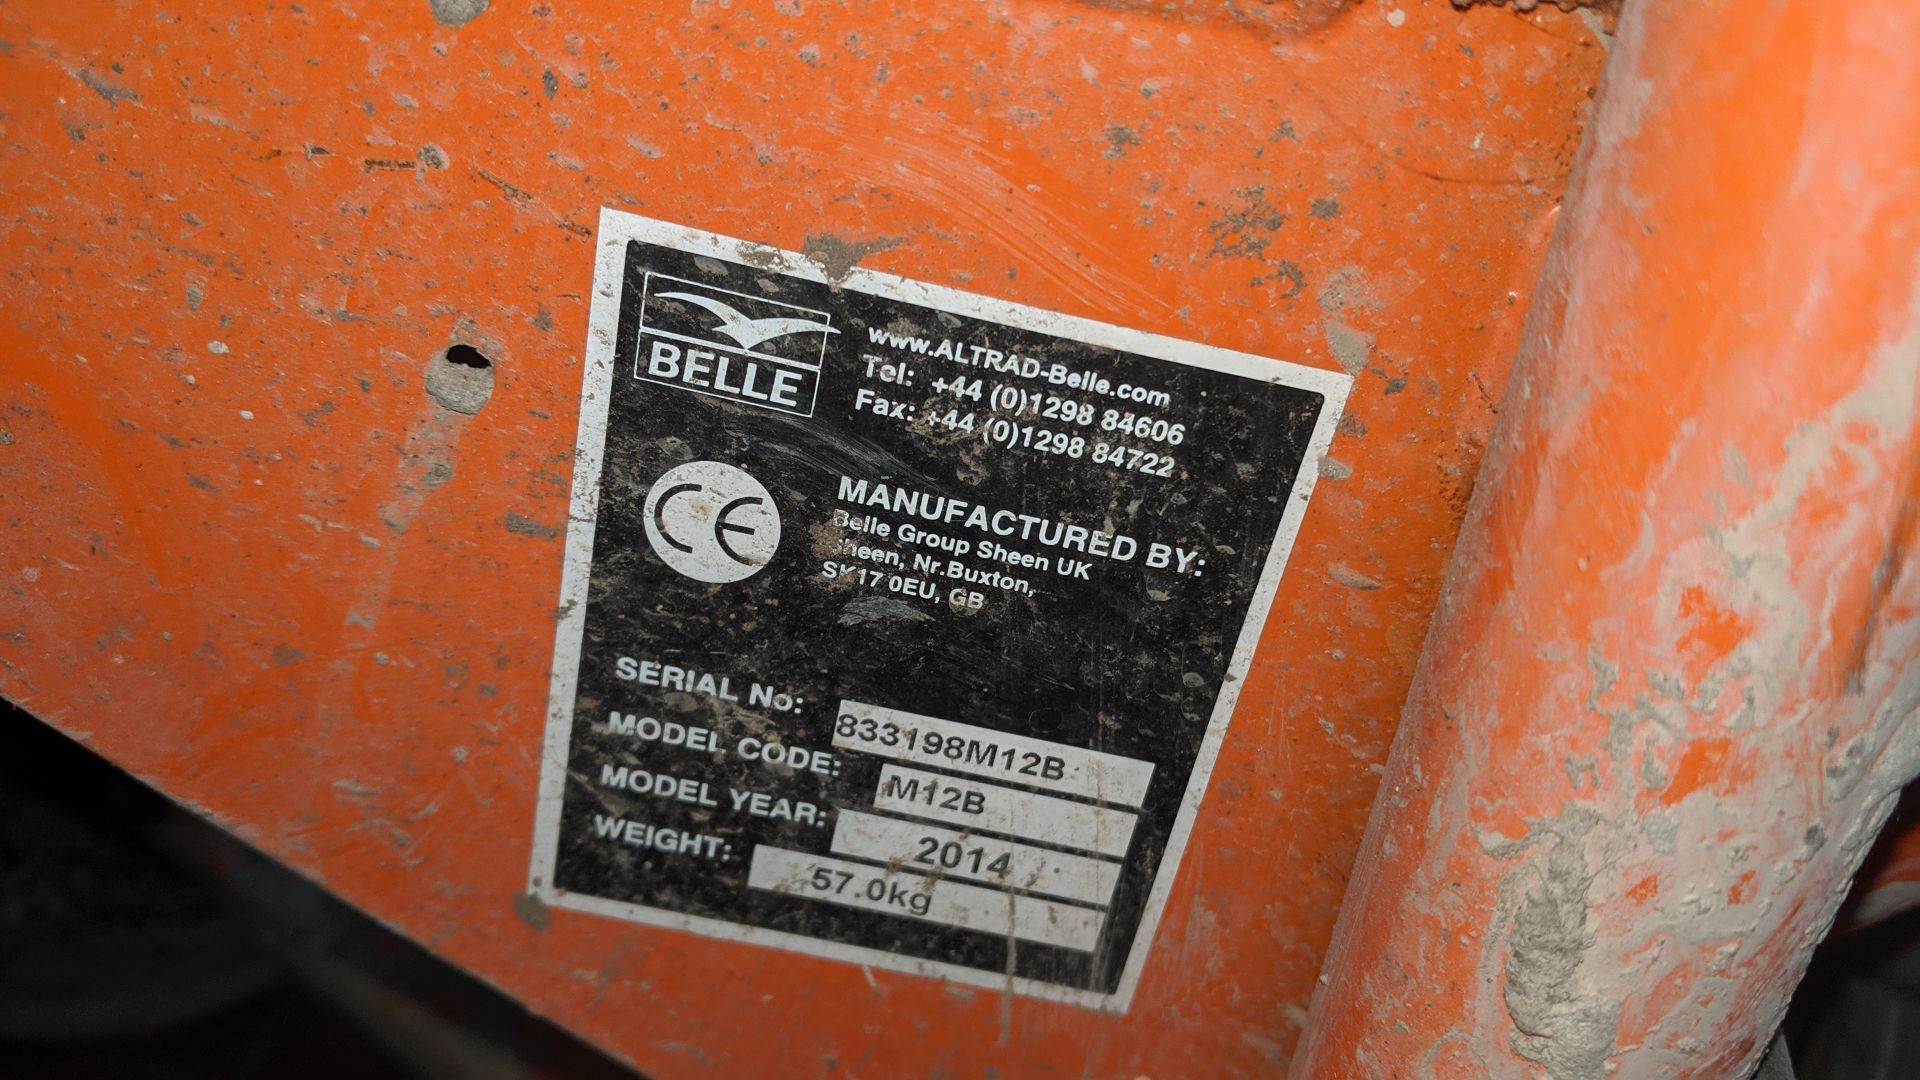 Belle mini mix 150 110V cement mixer, including separate static stand IMPORTANT: Please remember - Image 5 of 5